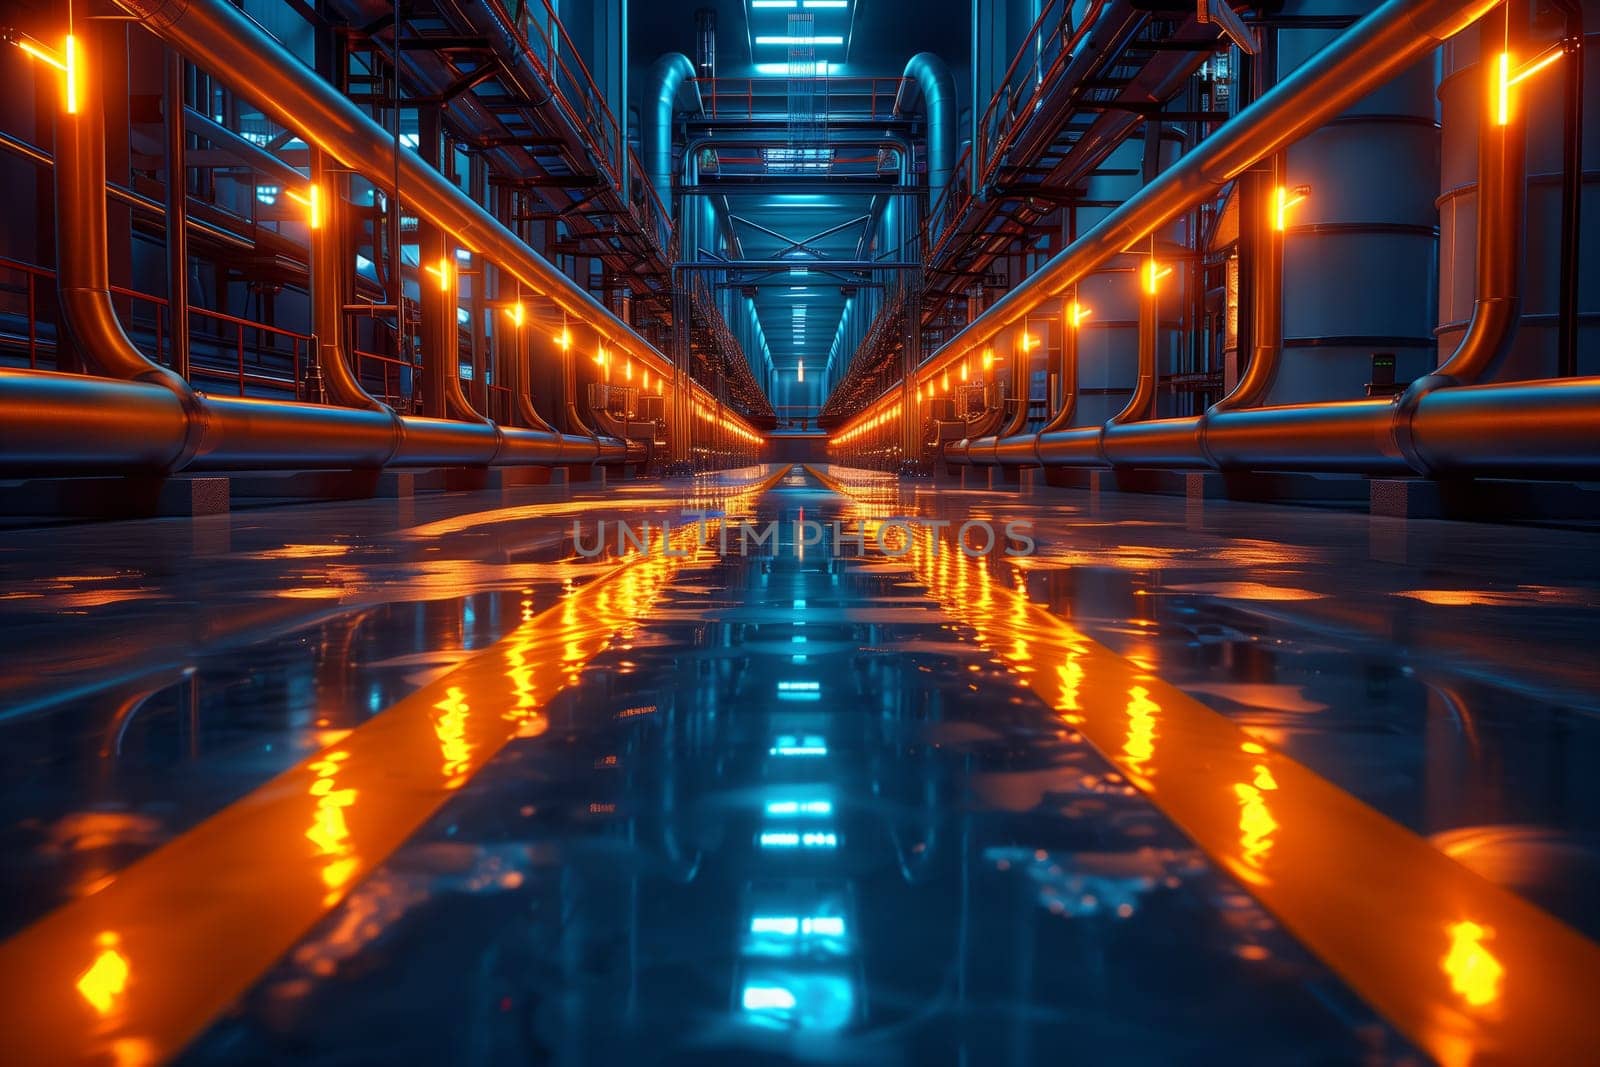 A city bridge with symmetrical automotive lighting is beautifully reflected in the electric blue water, showcasing the metropoliss engineering marvel and the magic of electricity